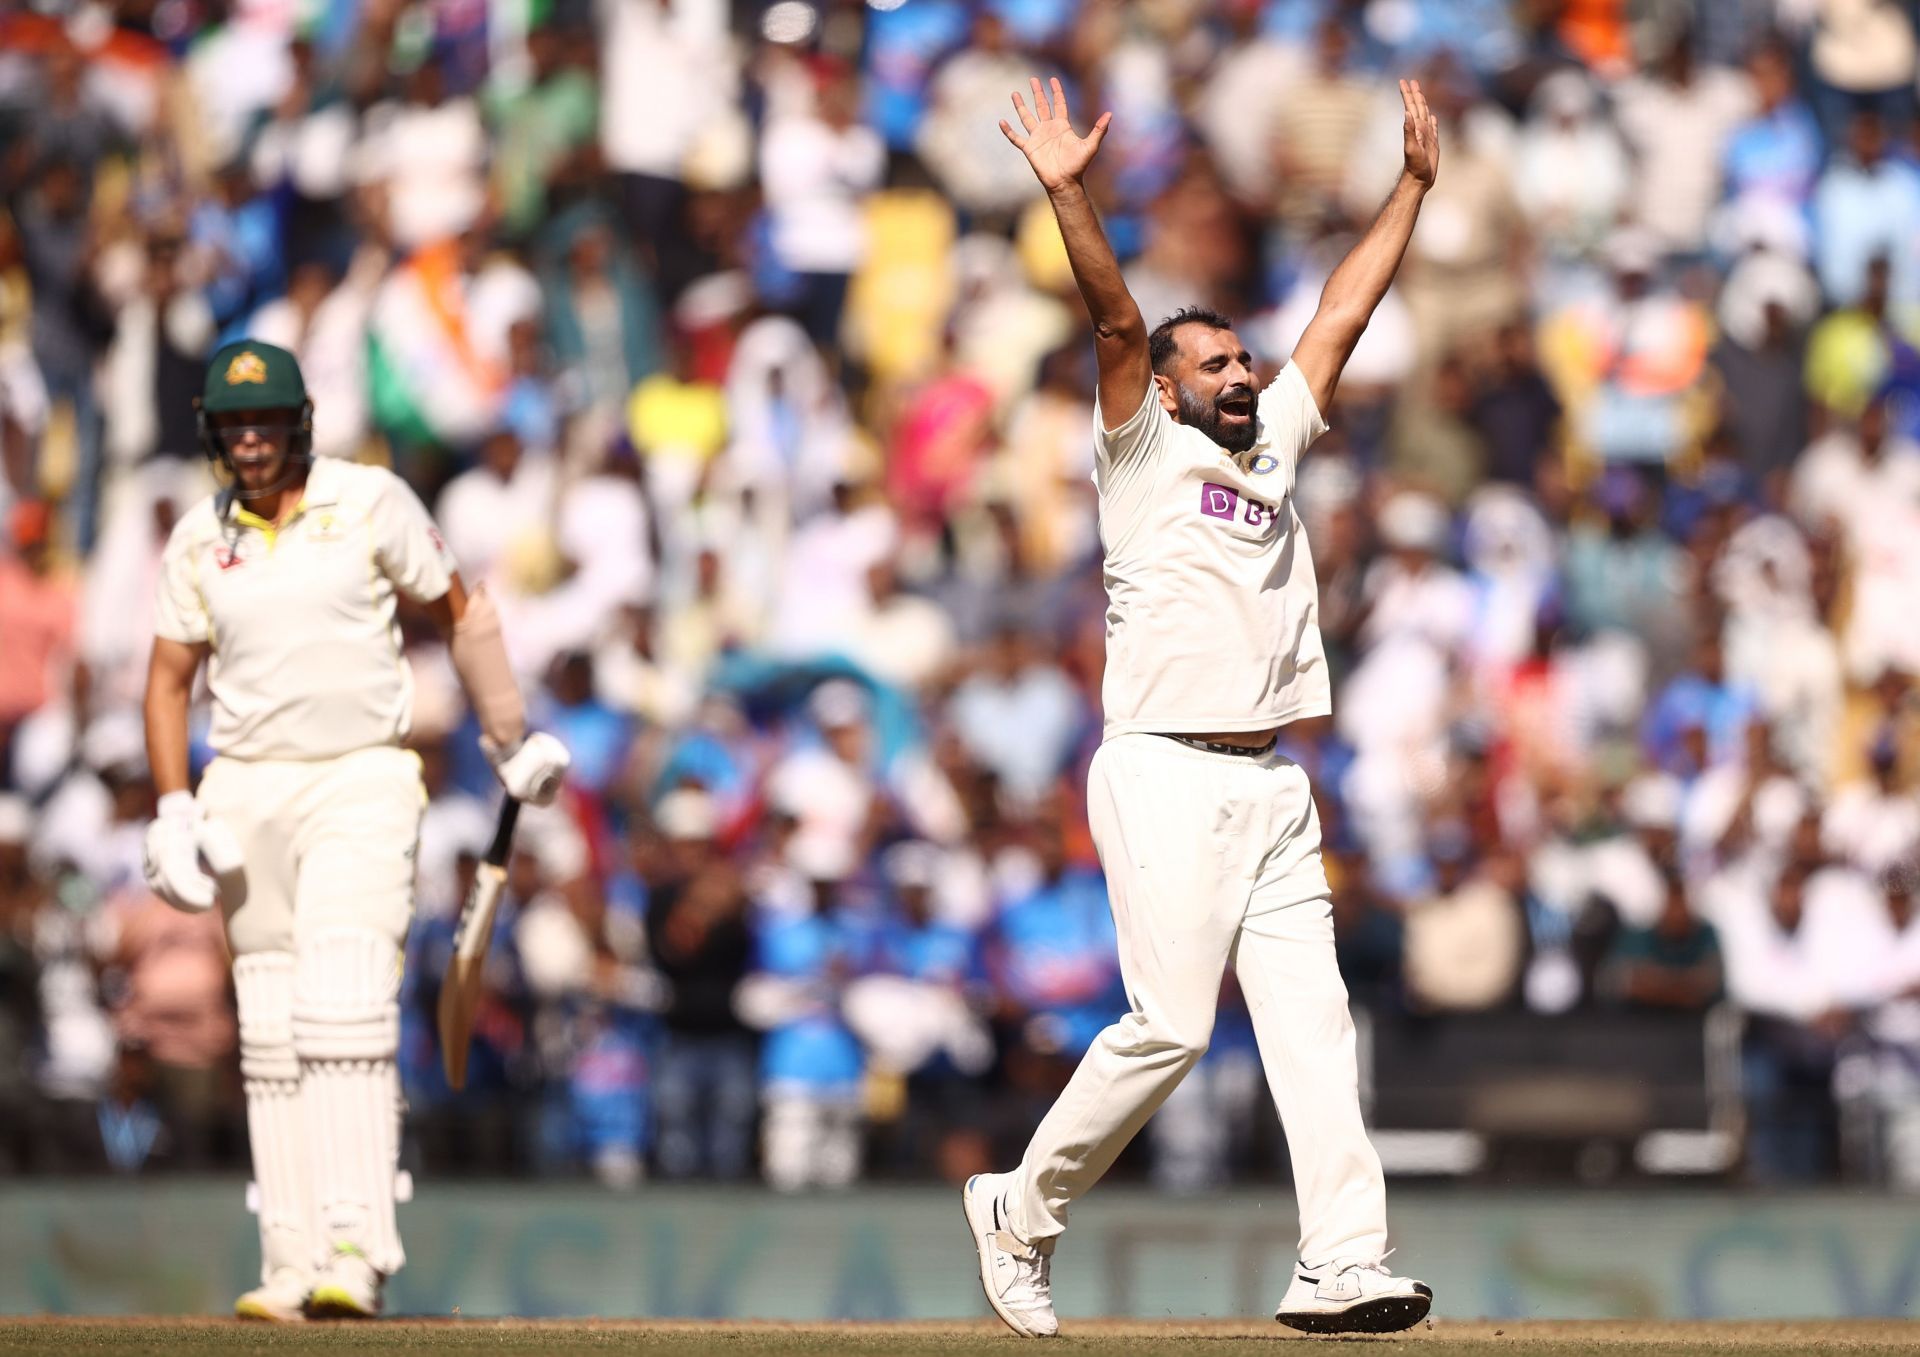 Mohammad Shami could return to the side for the final Test